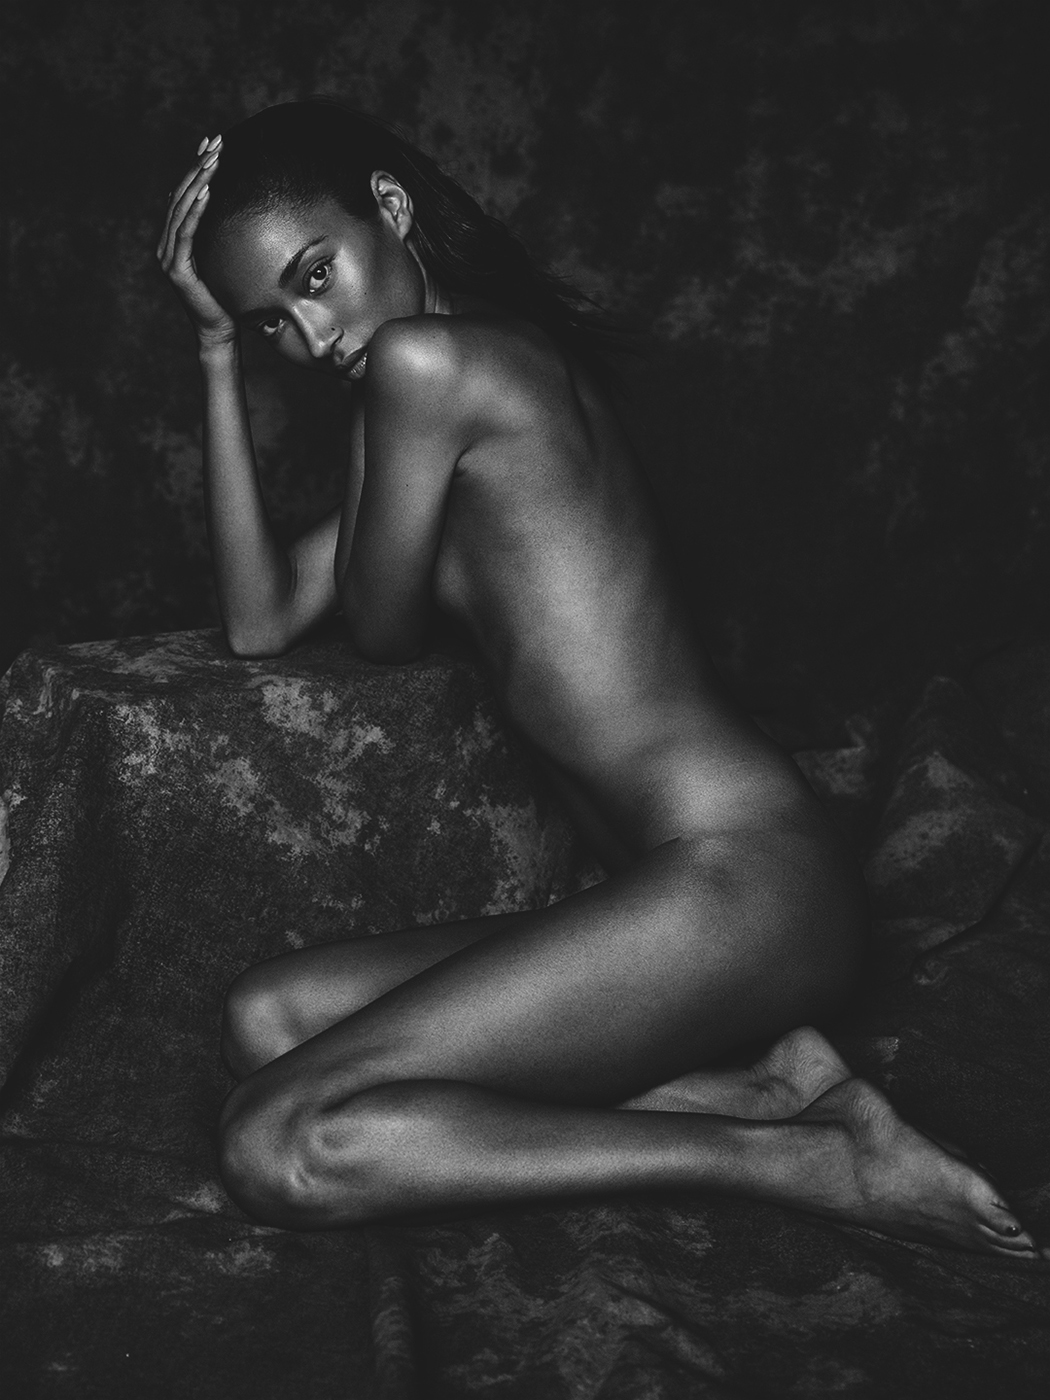 The Hottest Phots Of Anais Mali.